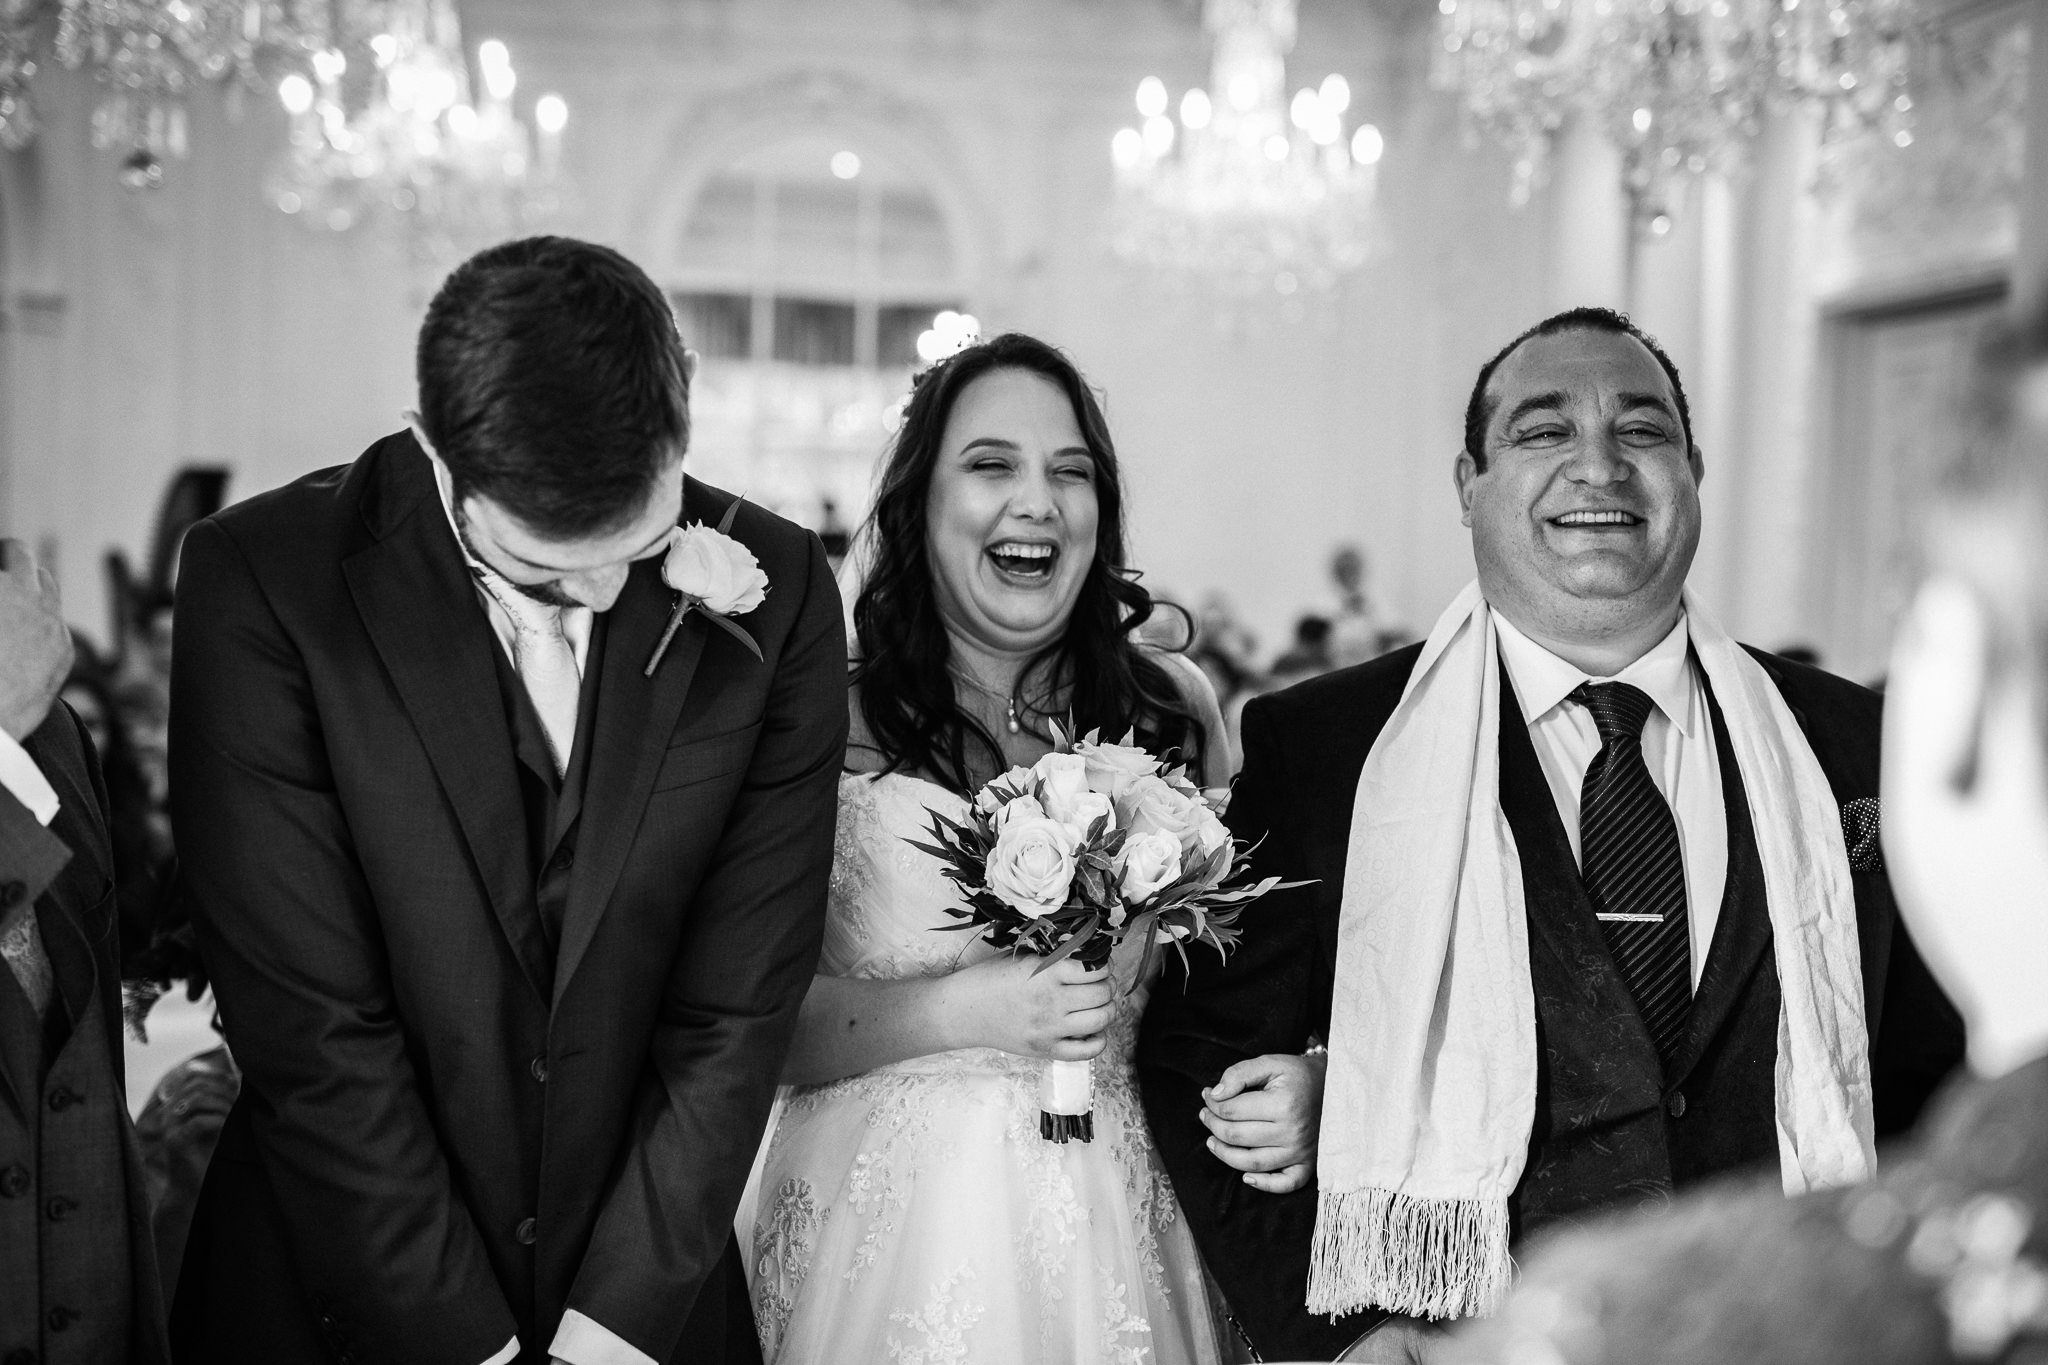  Bride laughing as she stands next to the Groom and her Father 